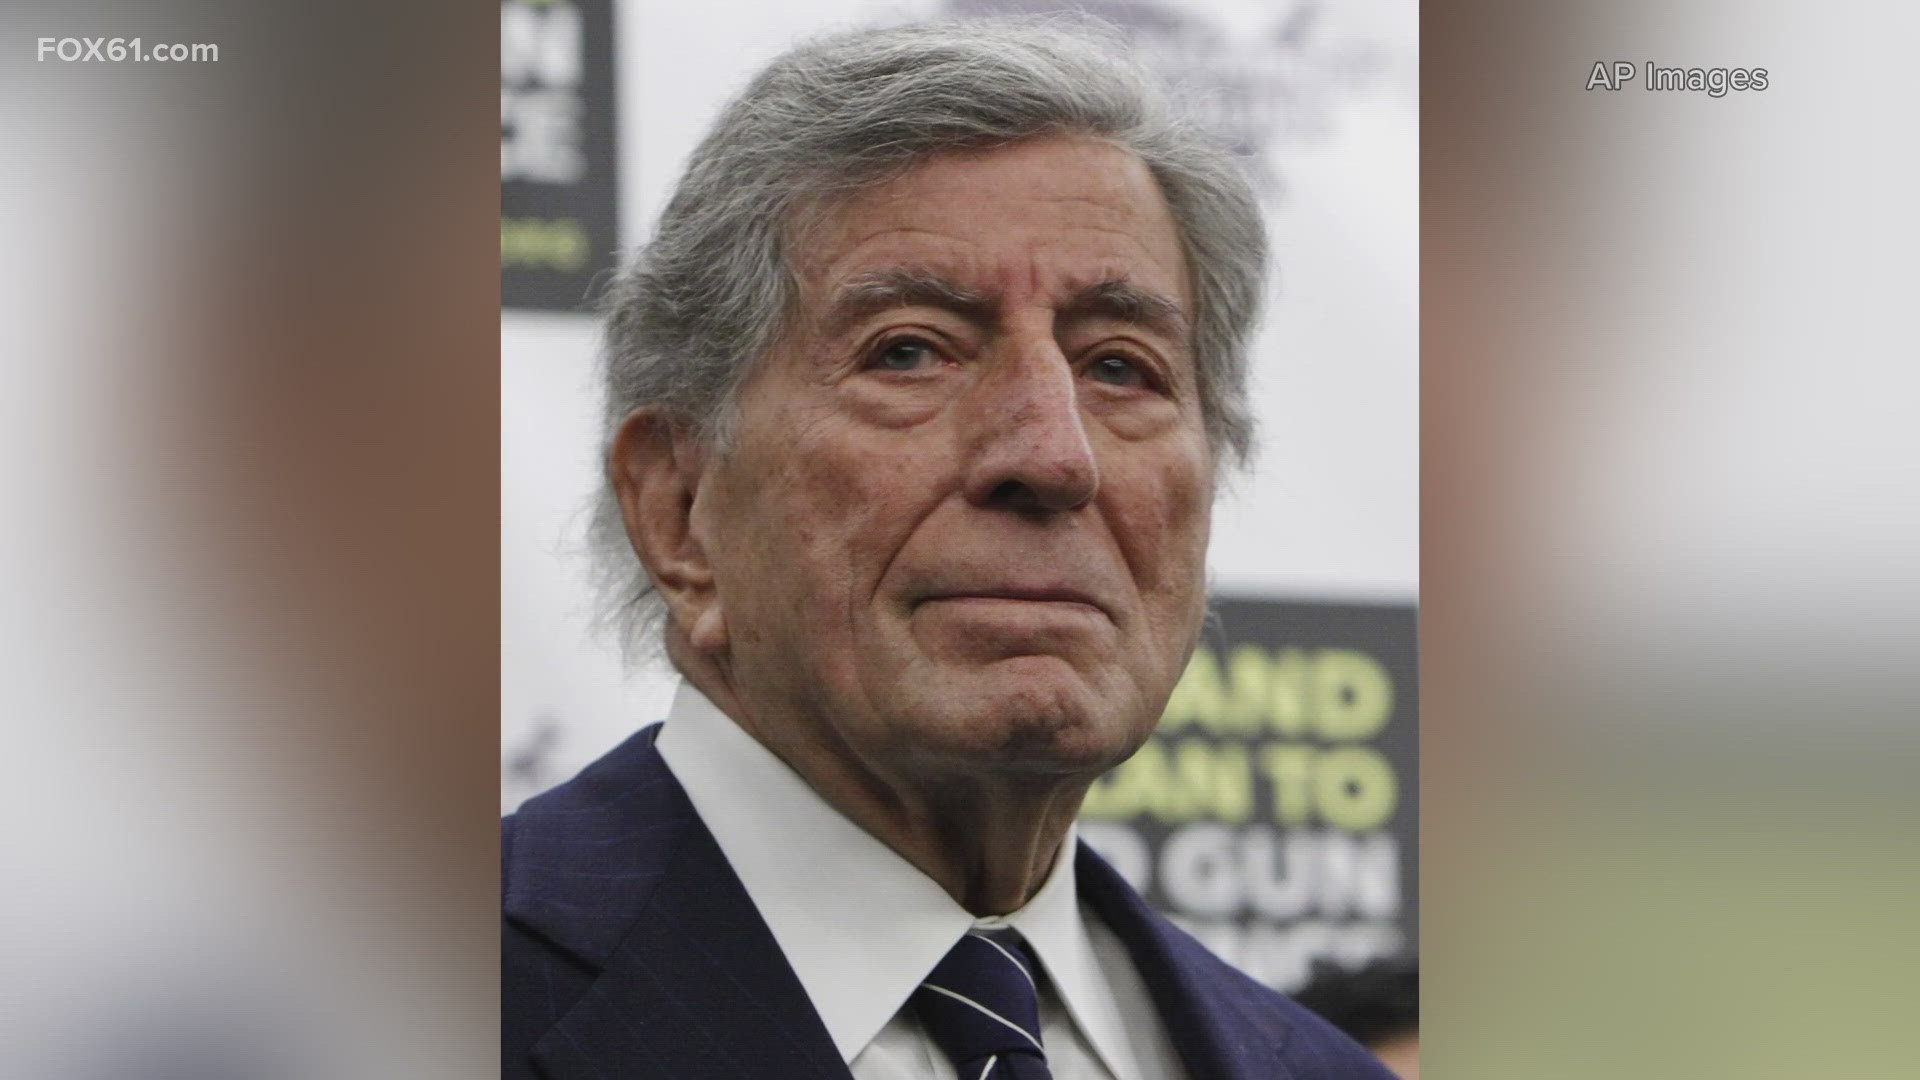 Tony Bennett died at the age of 96, just two weeks short of his birthday.